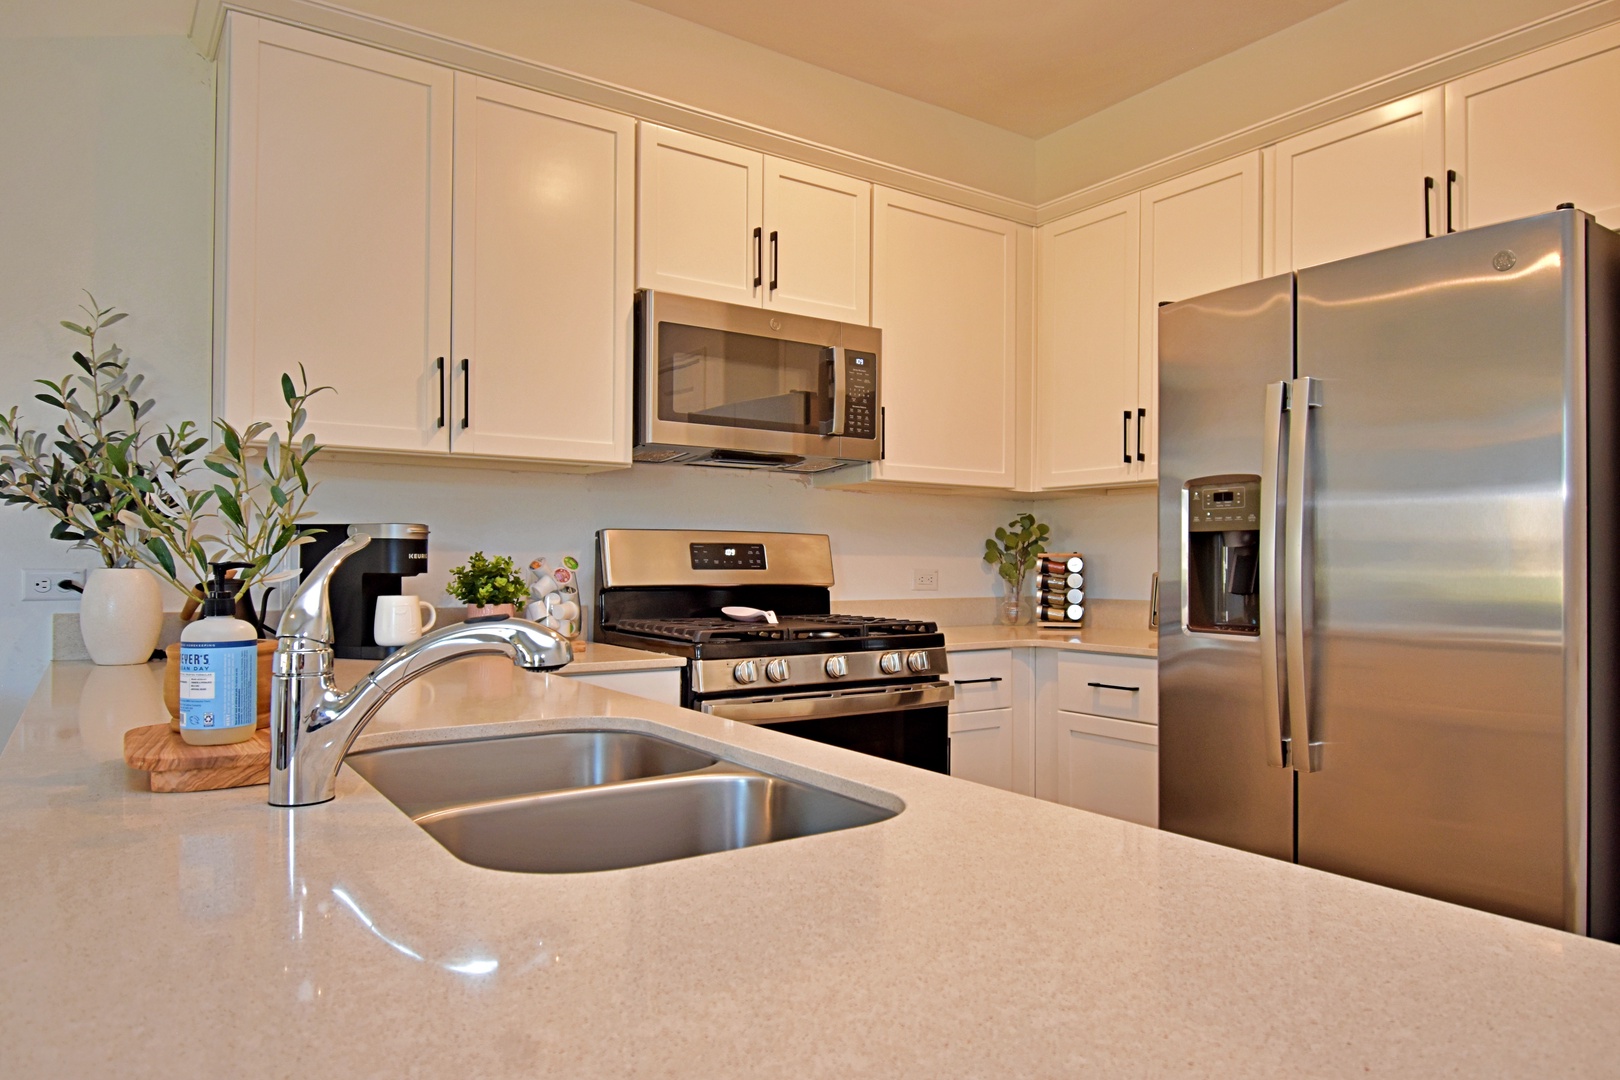 Large countertops to give you all the space for prepping